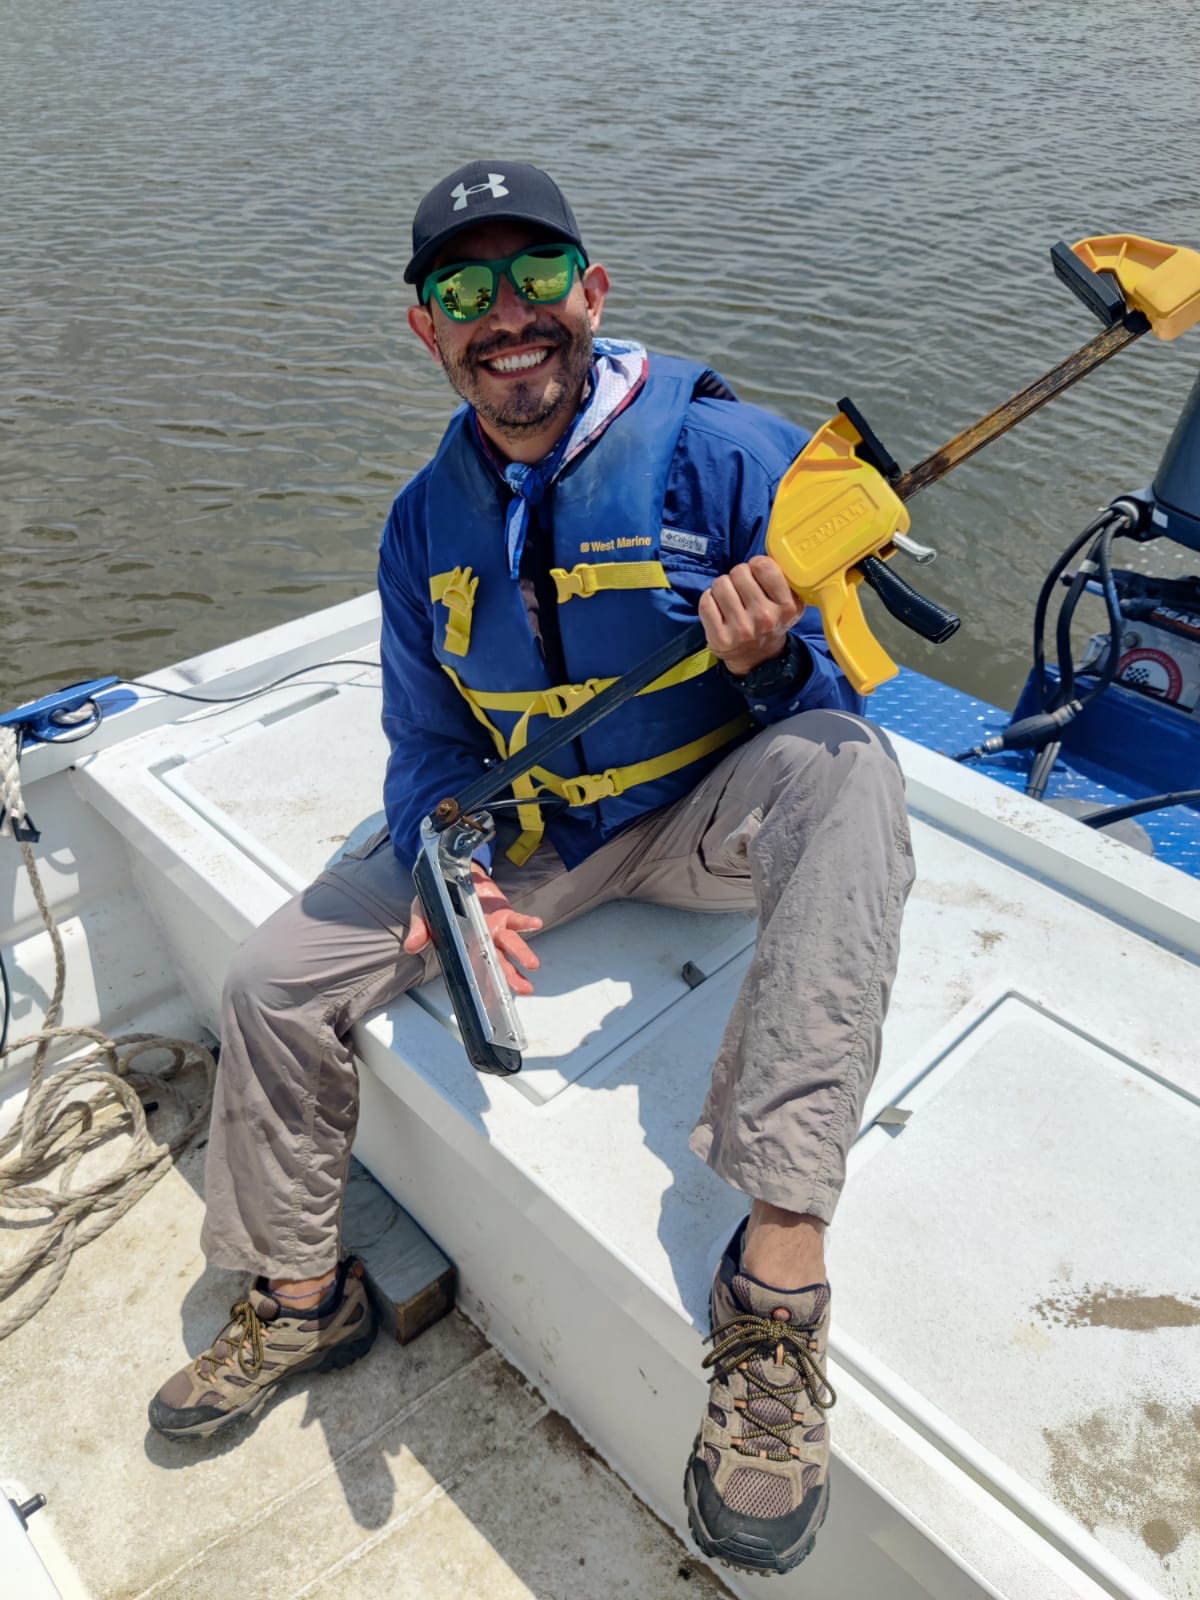 Talib is sitting on a boat, holding a long sonar instrument in his hand, wearing sunglasses and a hat, and smiling widely at the camera